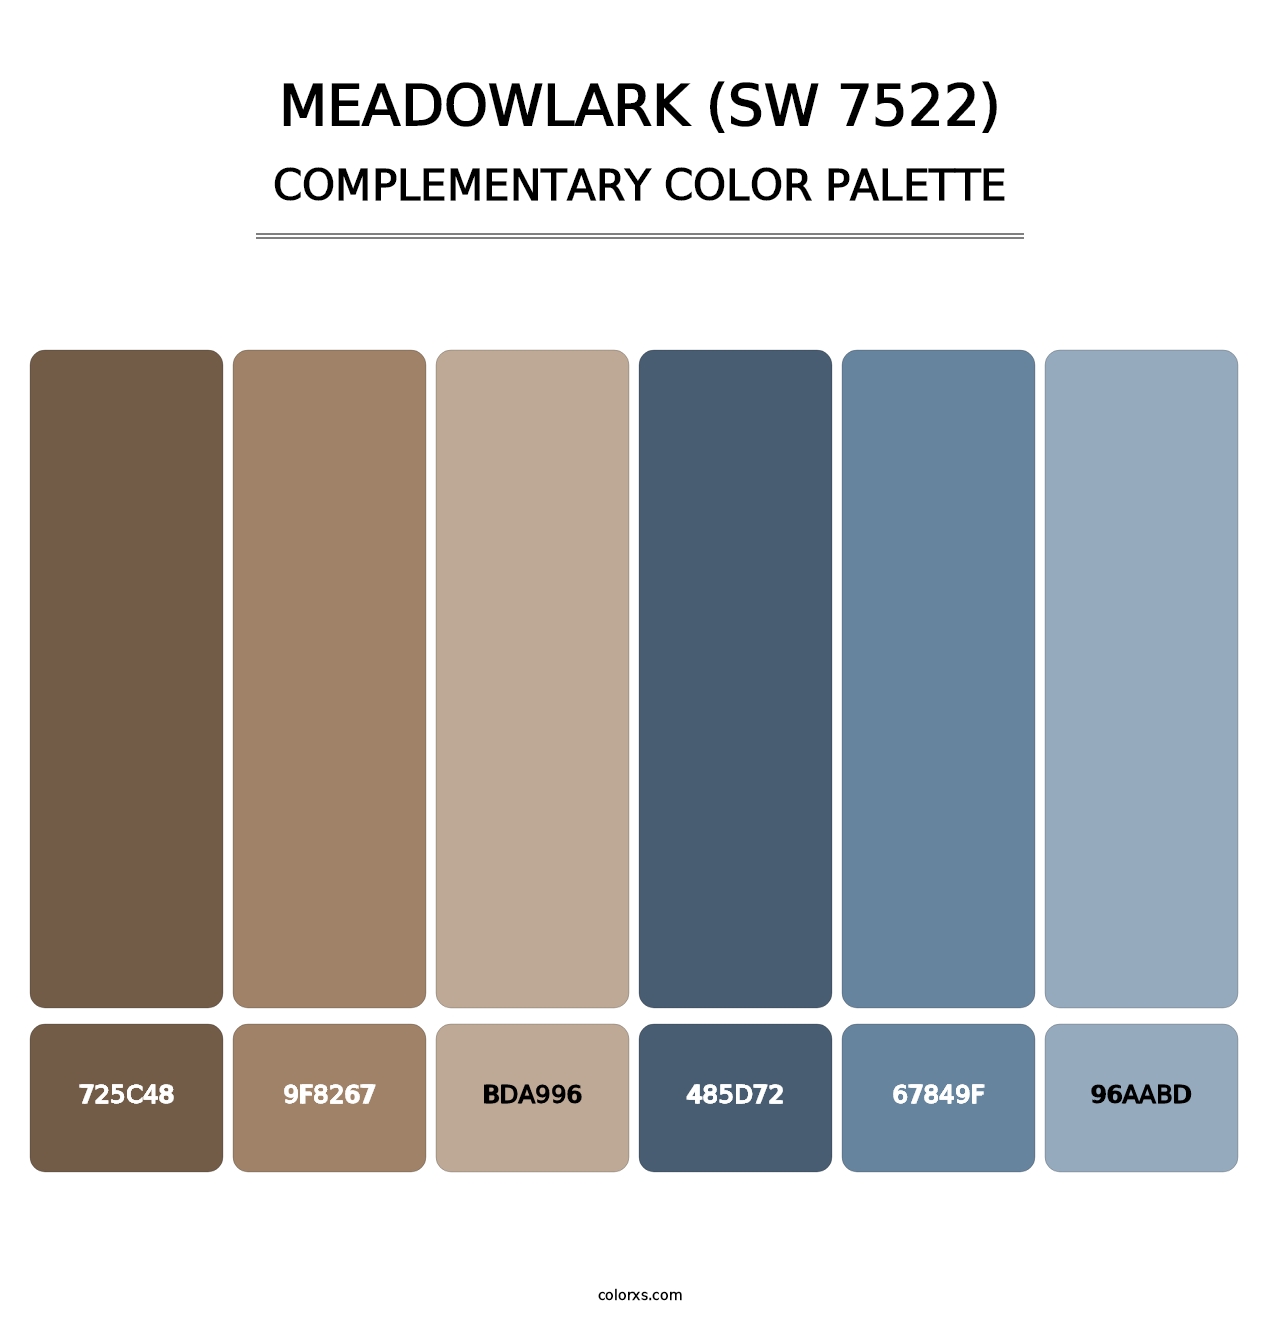 Meadowlark (SW 7522) - Complementary Color Palette